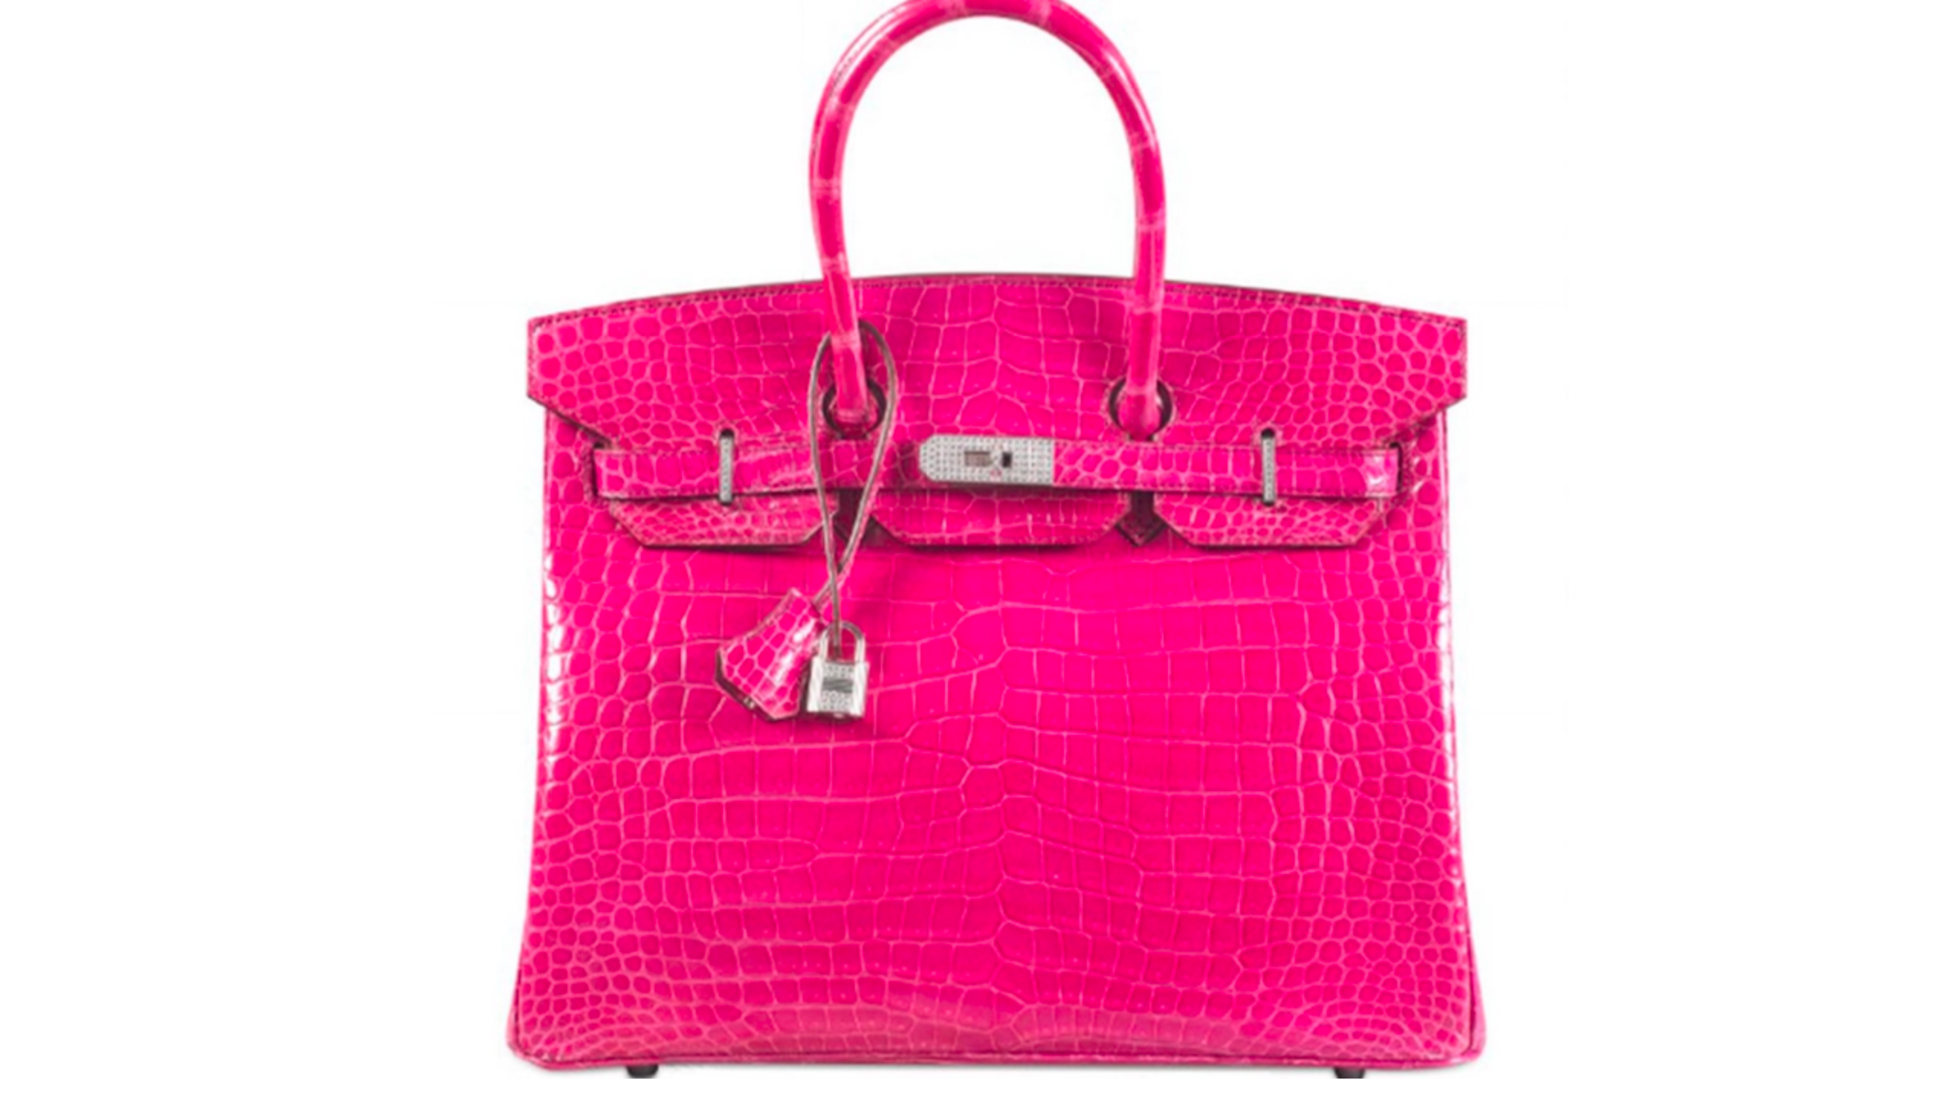 10 Facts About the Hermès Birkin Bag We Bet You Didn&#39;t Know - Catawiki